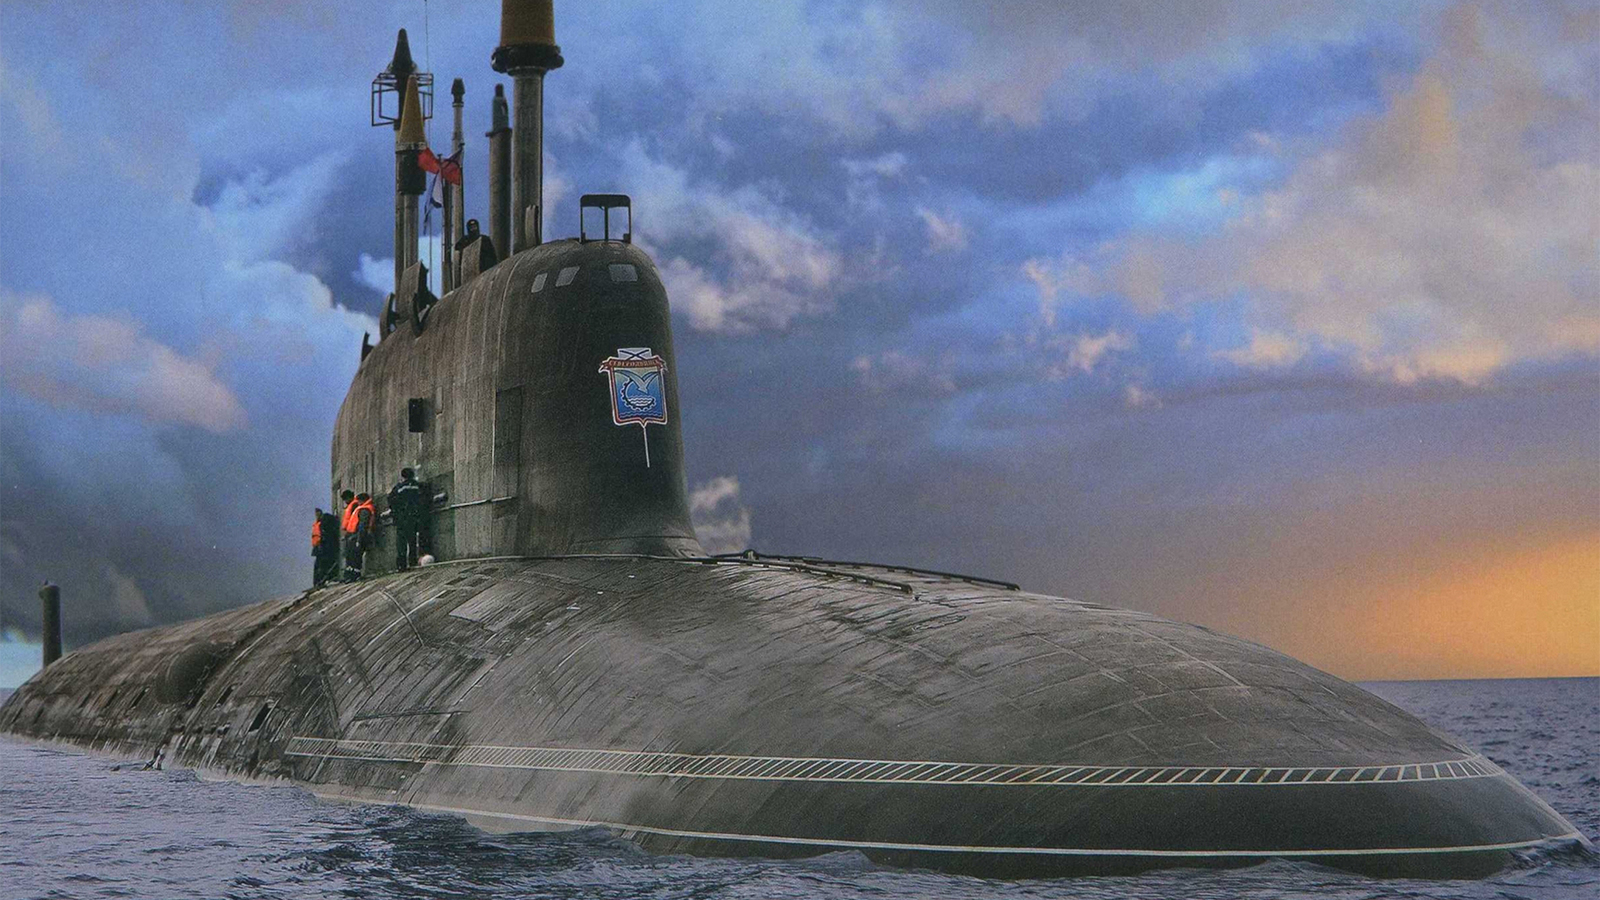 Cold War II: Russia deploying subs to historic chokepoint as U.S. upgrading European bases